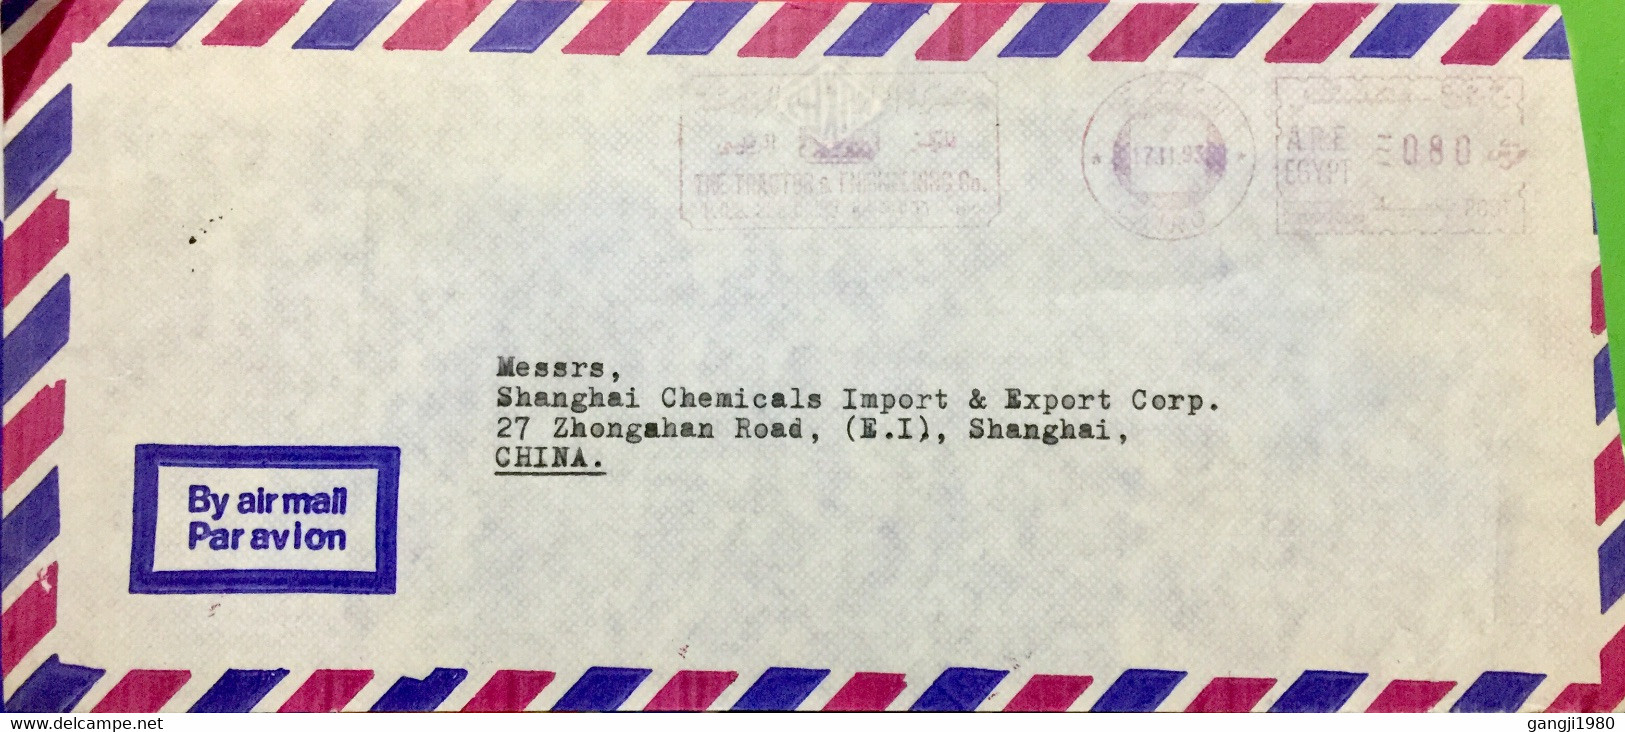 EGYPT 1993, AIRMAIL COVER USED TO CHINA, METER CANCEL, ADVERTISING THE TRACTOR & ENGINEERING COMPANY - Lettres & Documents